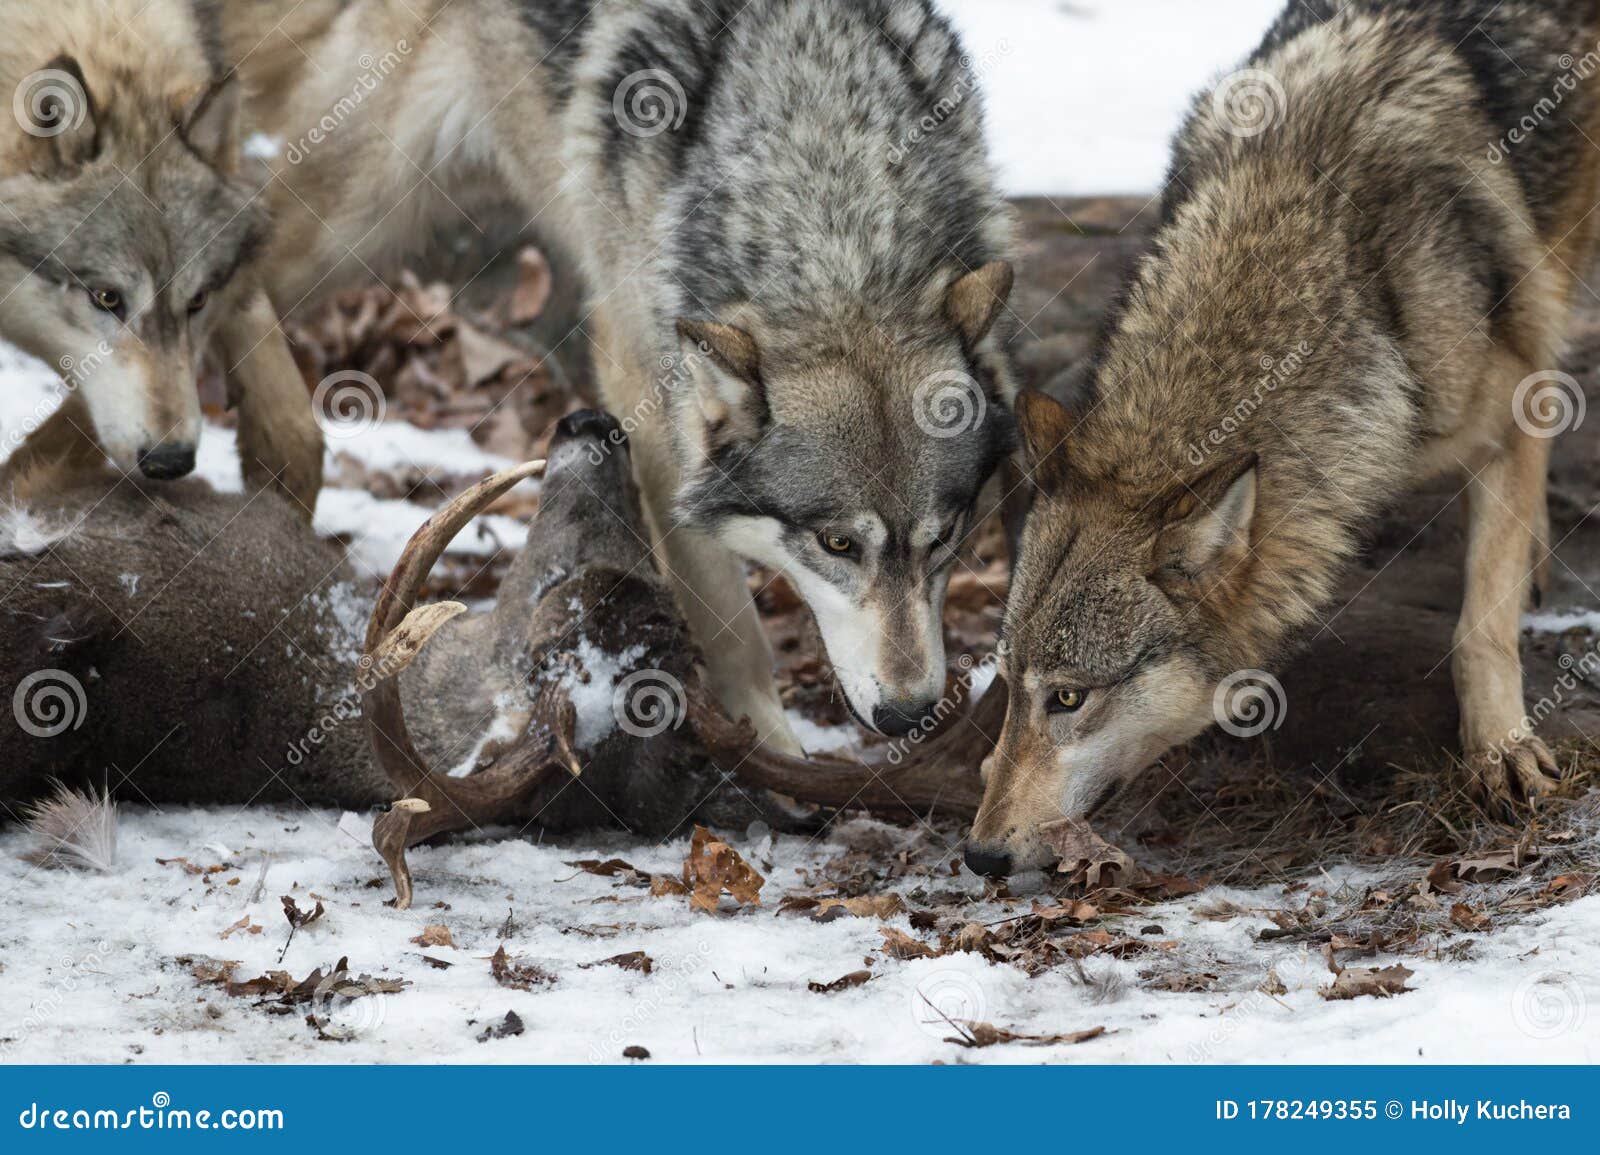 pack of grey wolves canis lupus sniff at white-tail deer head winter